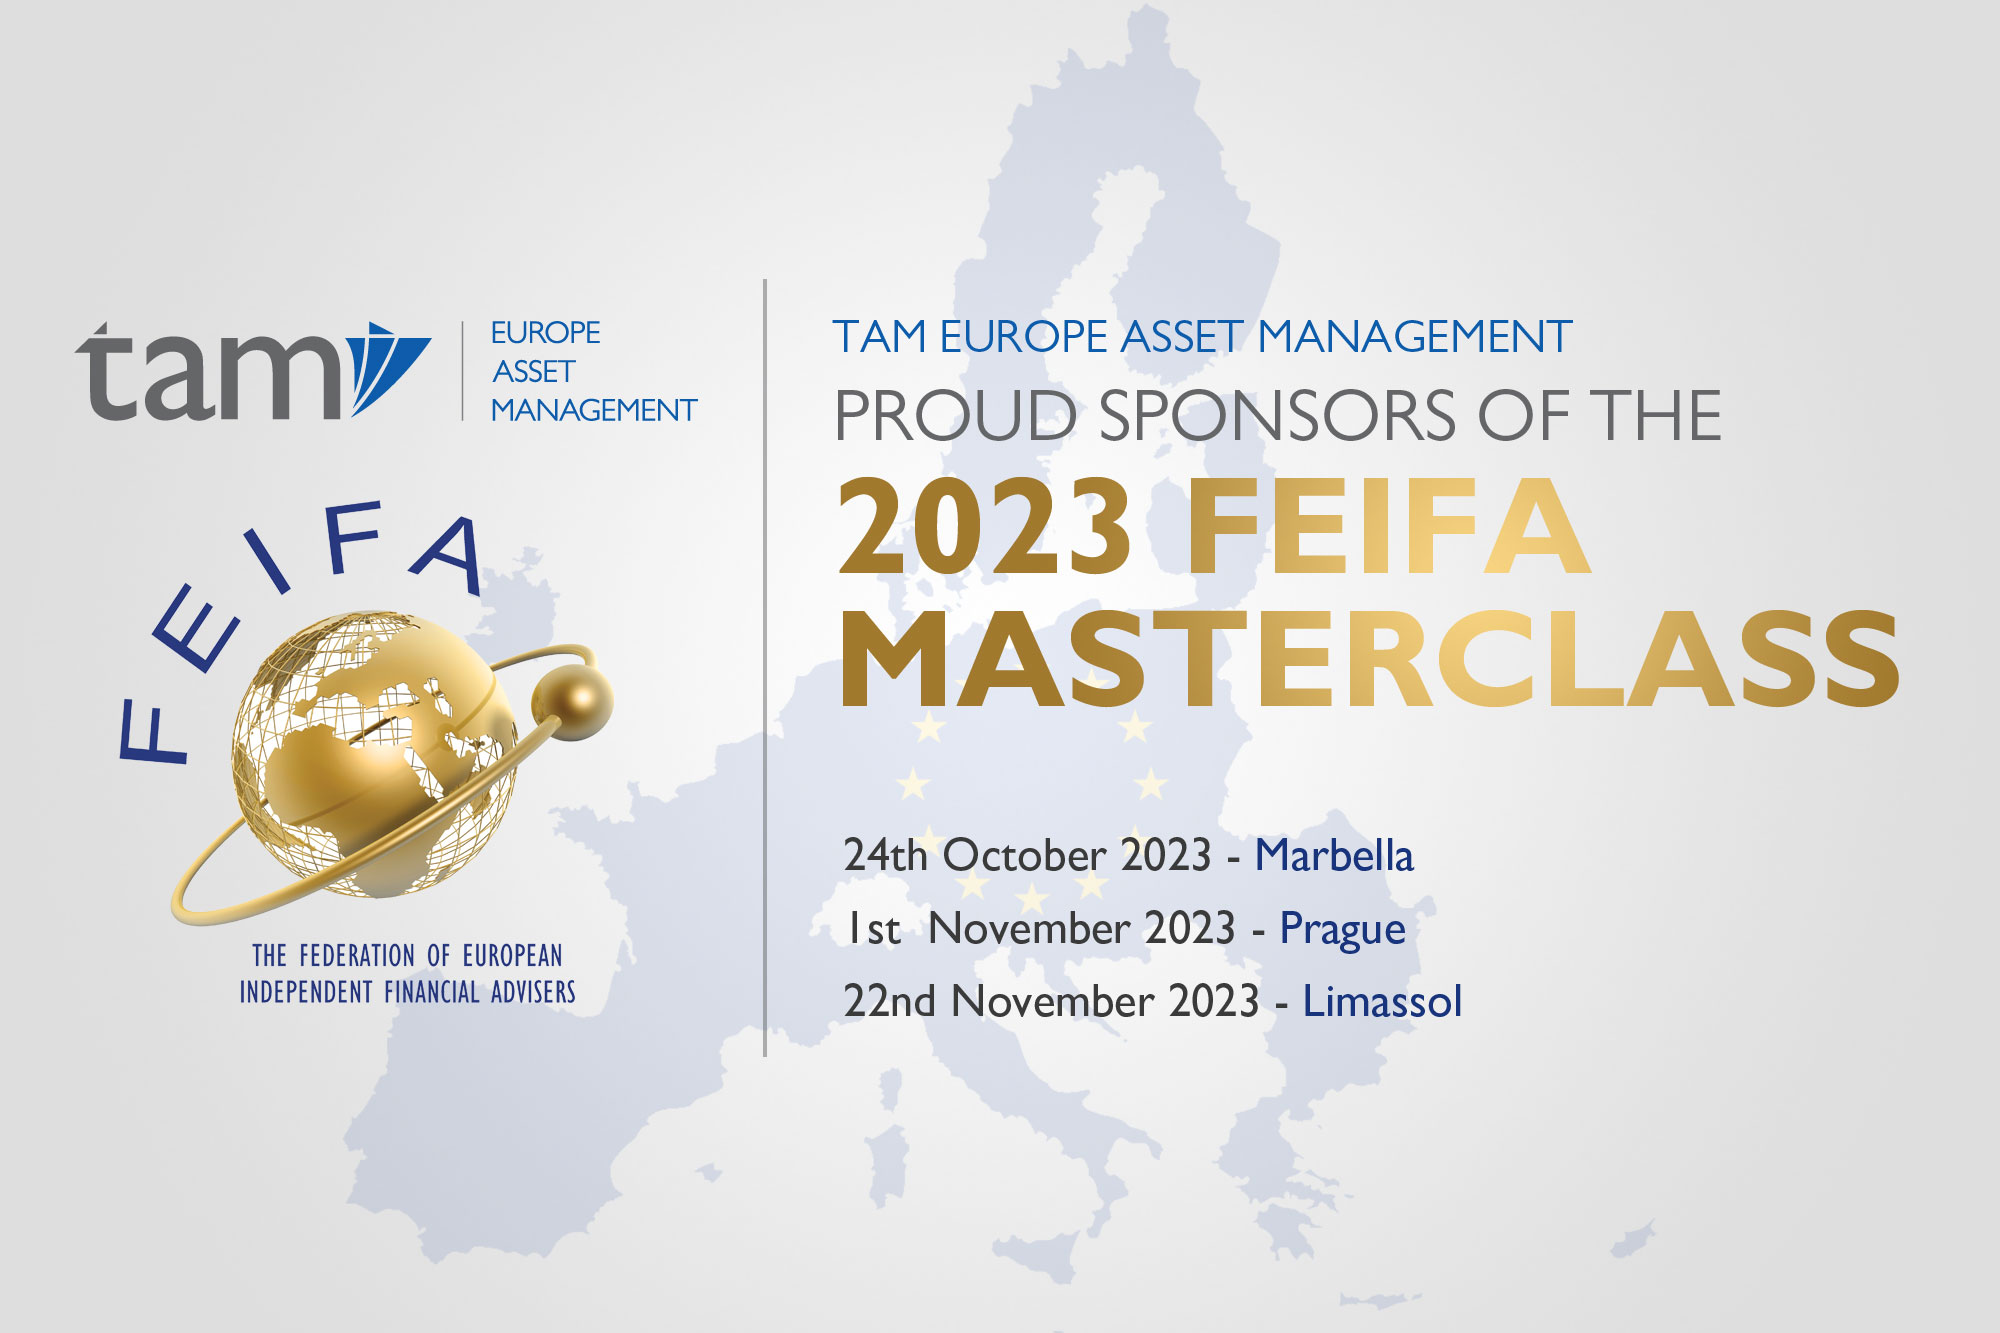 See you at the 2023 FEIFA Masterclass!